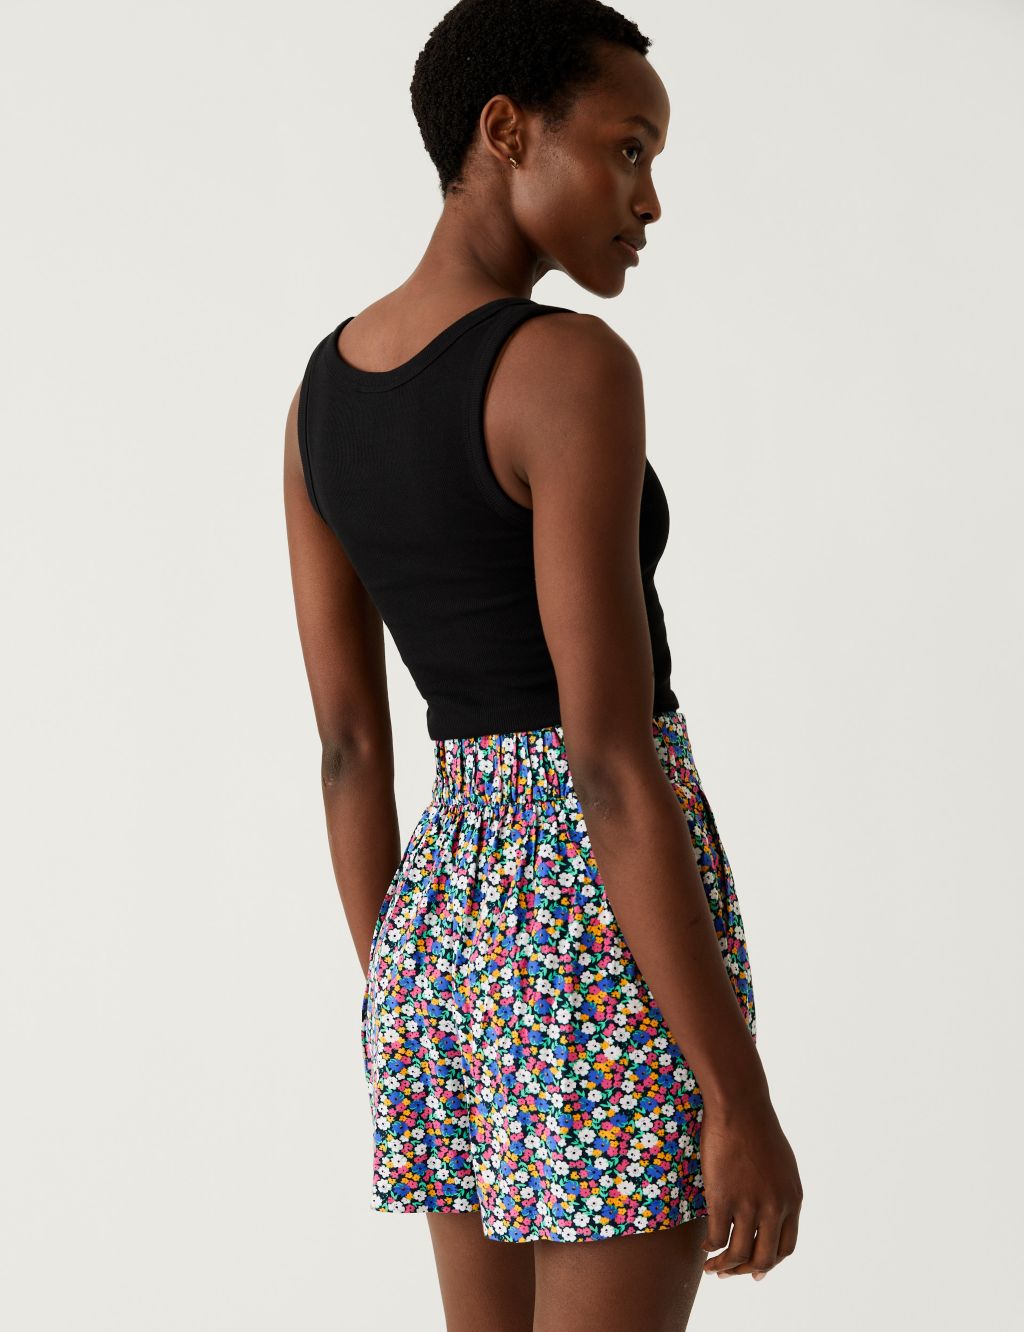 Printed Pleat Front Shorts image 3